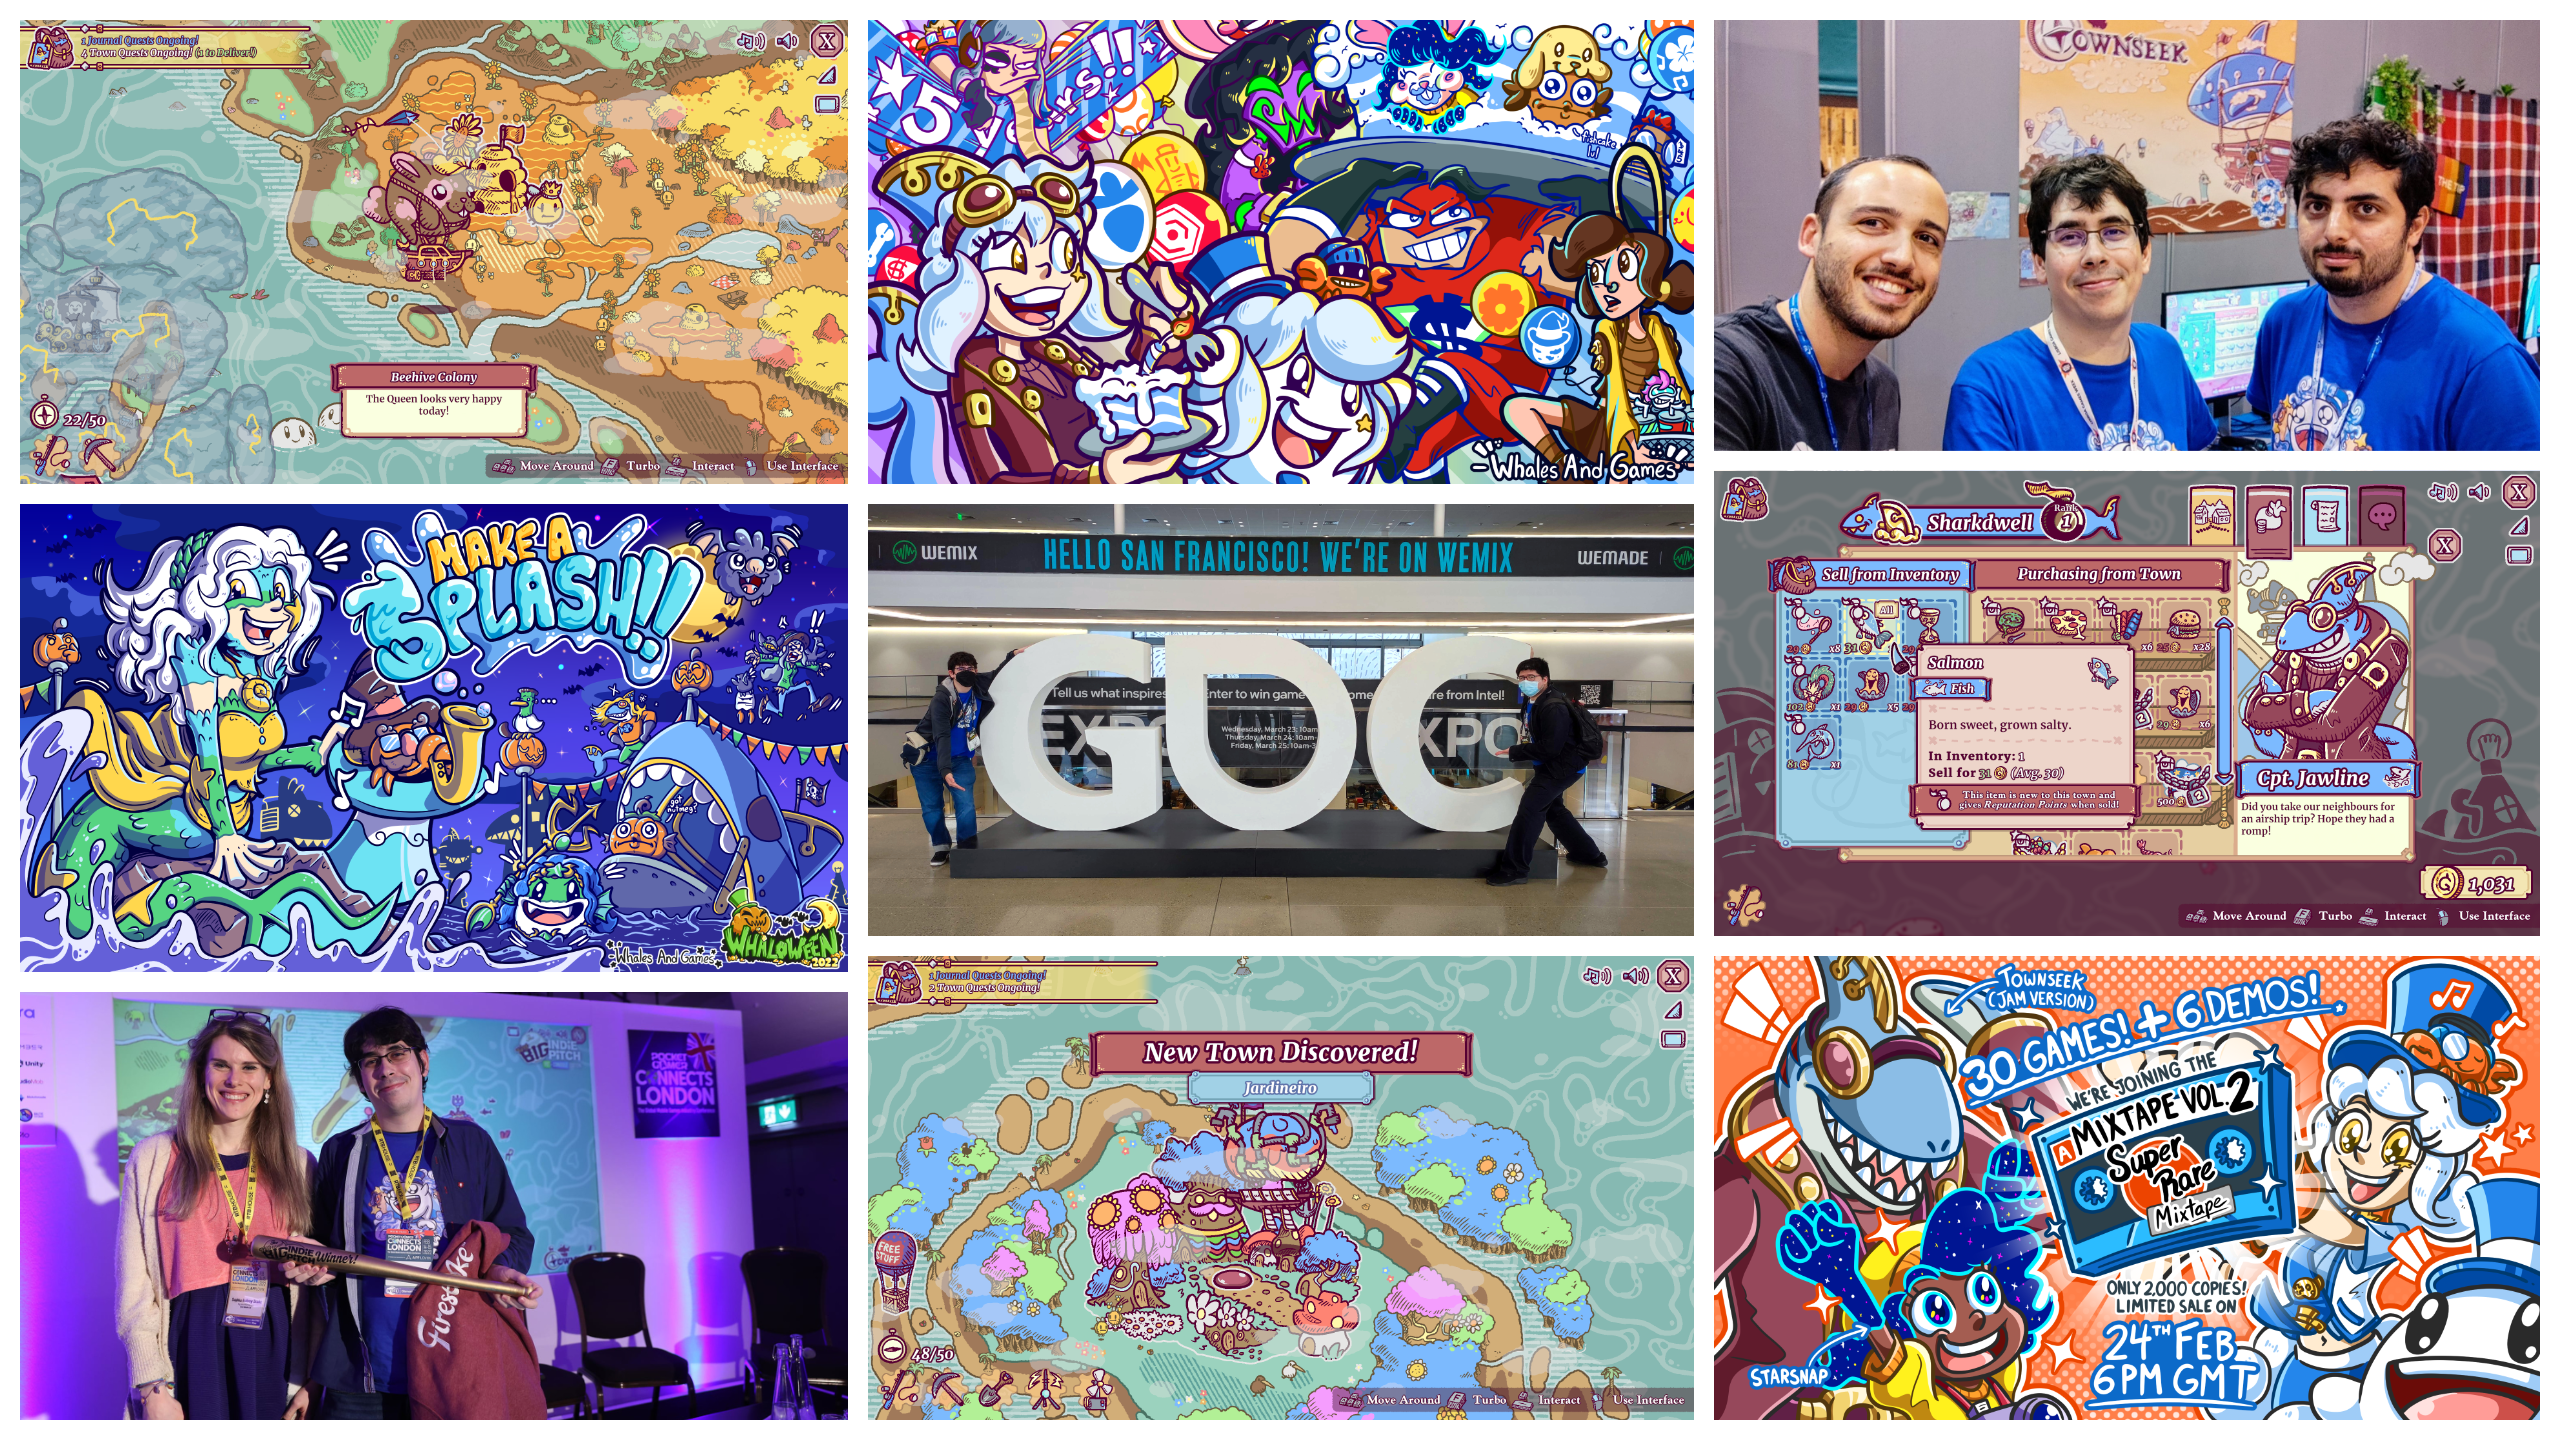 Collage of many of the Whales And Games milestones and achievements that happened during 2022. The first column starts with a screenshot from our game, Townseek, where the player’s ship is examining a beehive colony in an orange forest. It is followed by a second image featuring our Halloween artwork from this year, featuring Whalechan dressed as a Mermaid. The first column finishes with a photograph of Jorge receiving the Golden Bat for winning the Big Indie Pitch at PocketGamer Connects London at the start of the year.

The second column starts with our 5th anniversary artwork, featuring Whalechan, as well as many characters from our games. The second picture of the second column is a photograph of Jorge and Moski next to a big GDC sign from their travels to San Francisco for GDC for the first time. The second column finishes with another screenshot from Townseek, where the player’s ship is discovering the town of Jardineiro punctuated by its colourful multicoloured tree guardian.

The third column has a picture of Jorge and John (as well as José, the developer of Exophobia) in front of the Whales And Games stand for Lisboa Games Week featuring a playable version of Townseek. The second image is once again a Townseek screenshot, highlighting the trading mechanics of the game. The third column finishes with an artwork celebrating the release of the Super Rare Mixtape Vol. 2, with Whalechan highlighting the released tape together with characters from the Whales And Games games featured in the compilation.